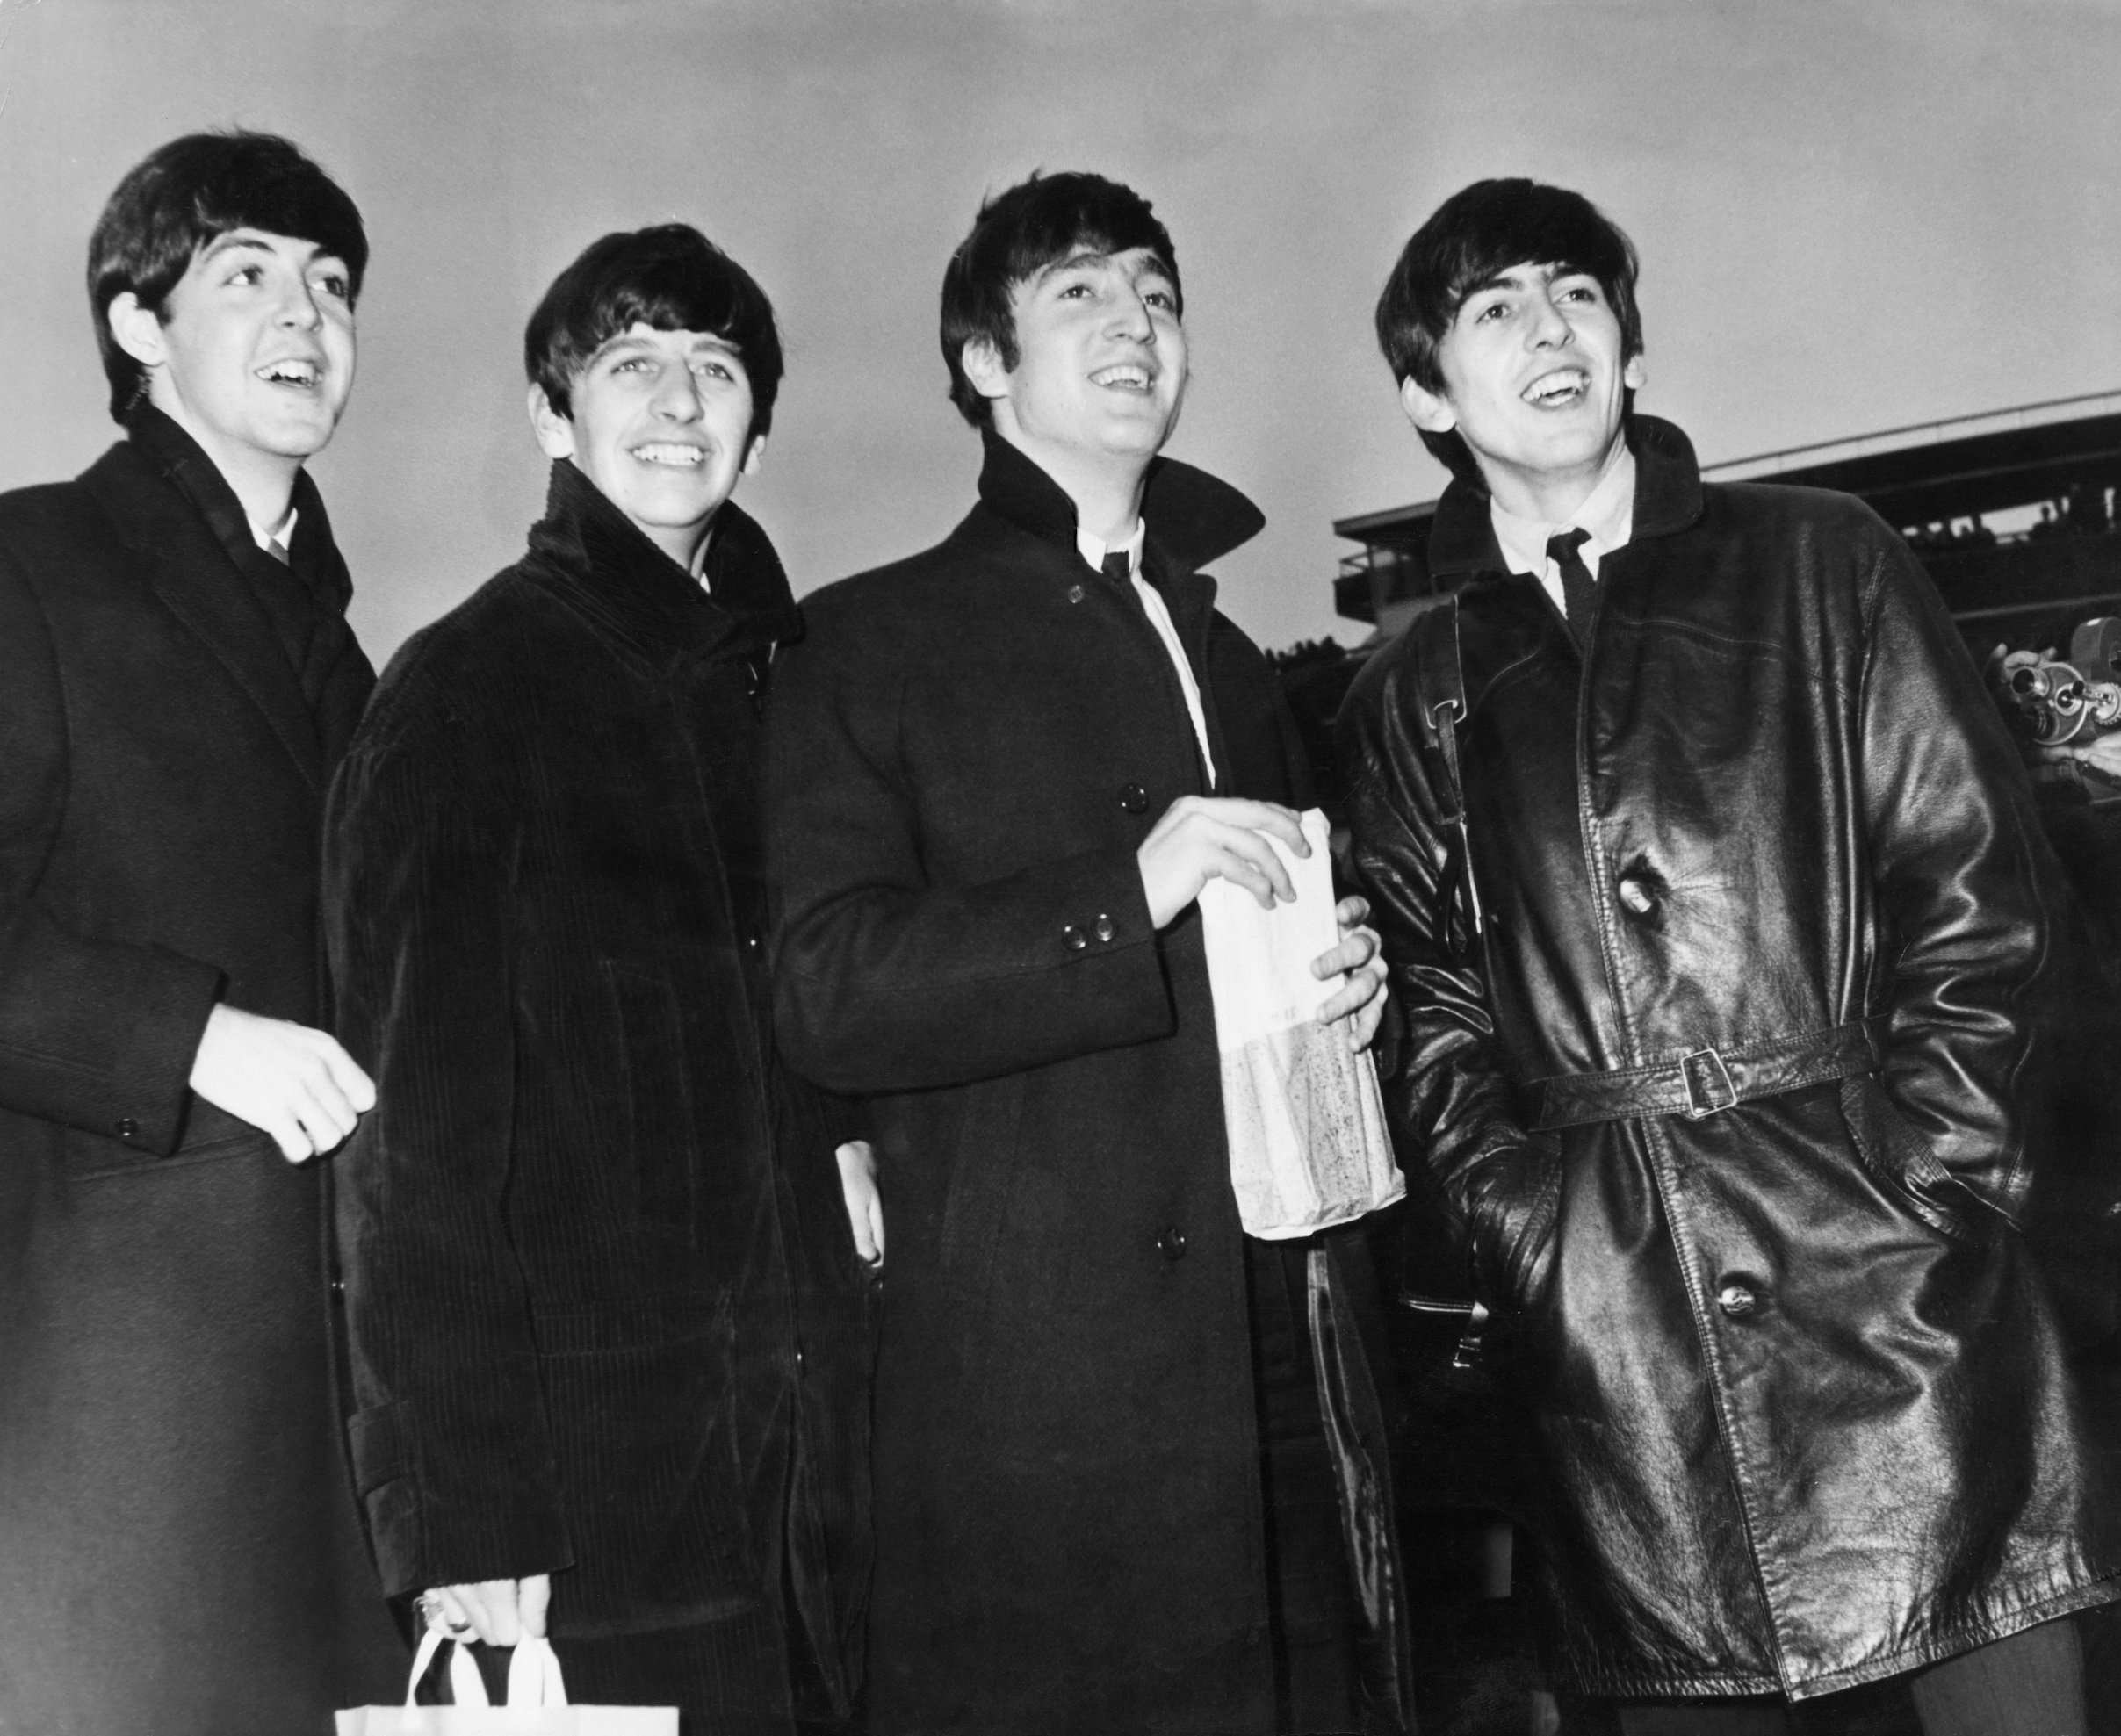 The Beatles return to the U.K. after a tour of Sweden